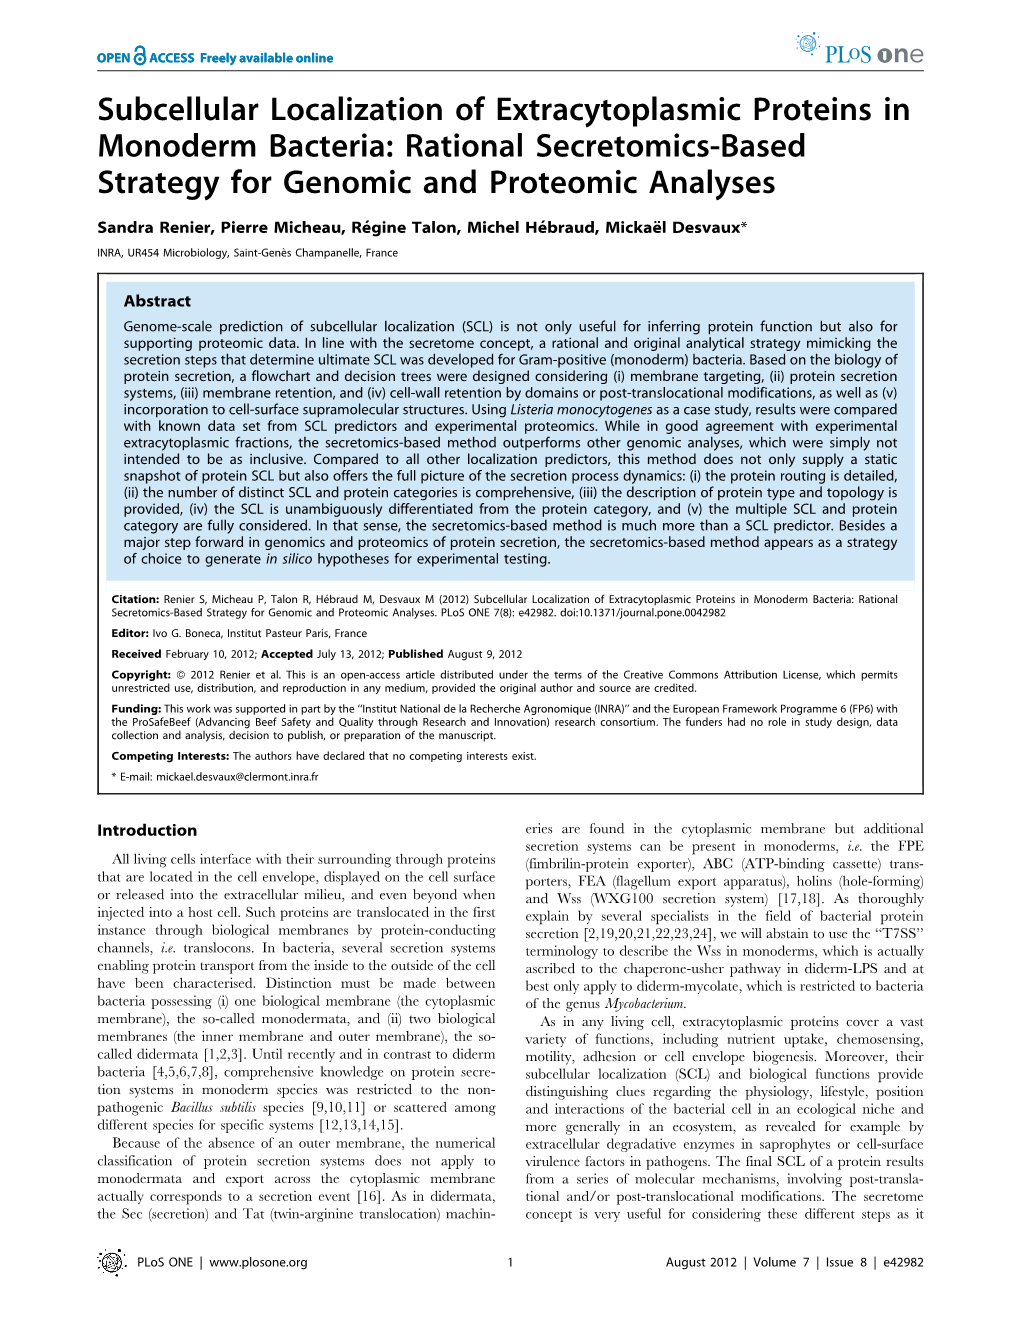 Subcellular Localization of Extracytoplasmic Proteins in Monoderm Bacteria: Rational Secretomics-Based Strategy for Genomic and Proteomic Analyses